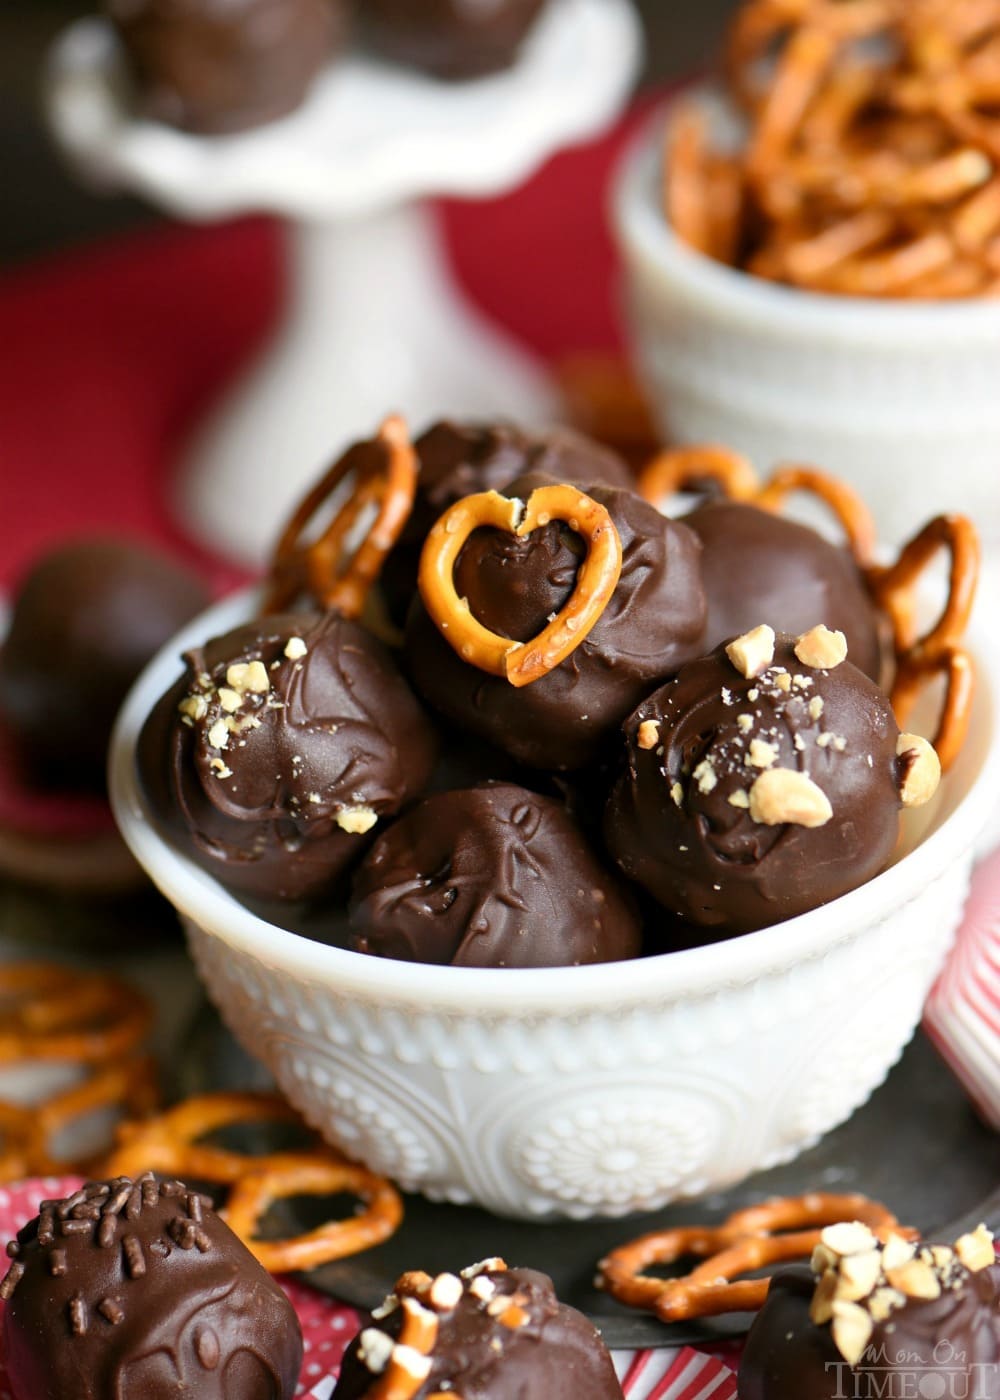 Peanut Butter Balls are taken to the next level with the addition of pretzels in this easy Chocolate Pretzel Peanut Butter Balls recipe. The creamy, crunchy, salty, sweet combination is the best of all worlds. Extra delicious and loaded with peanut butter, chocolate chips, and pretzels! // Mom On Timeout 